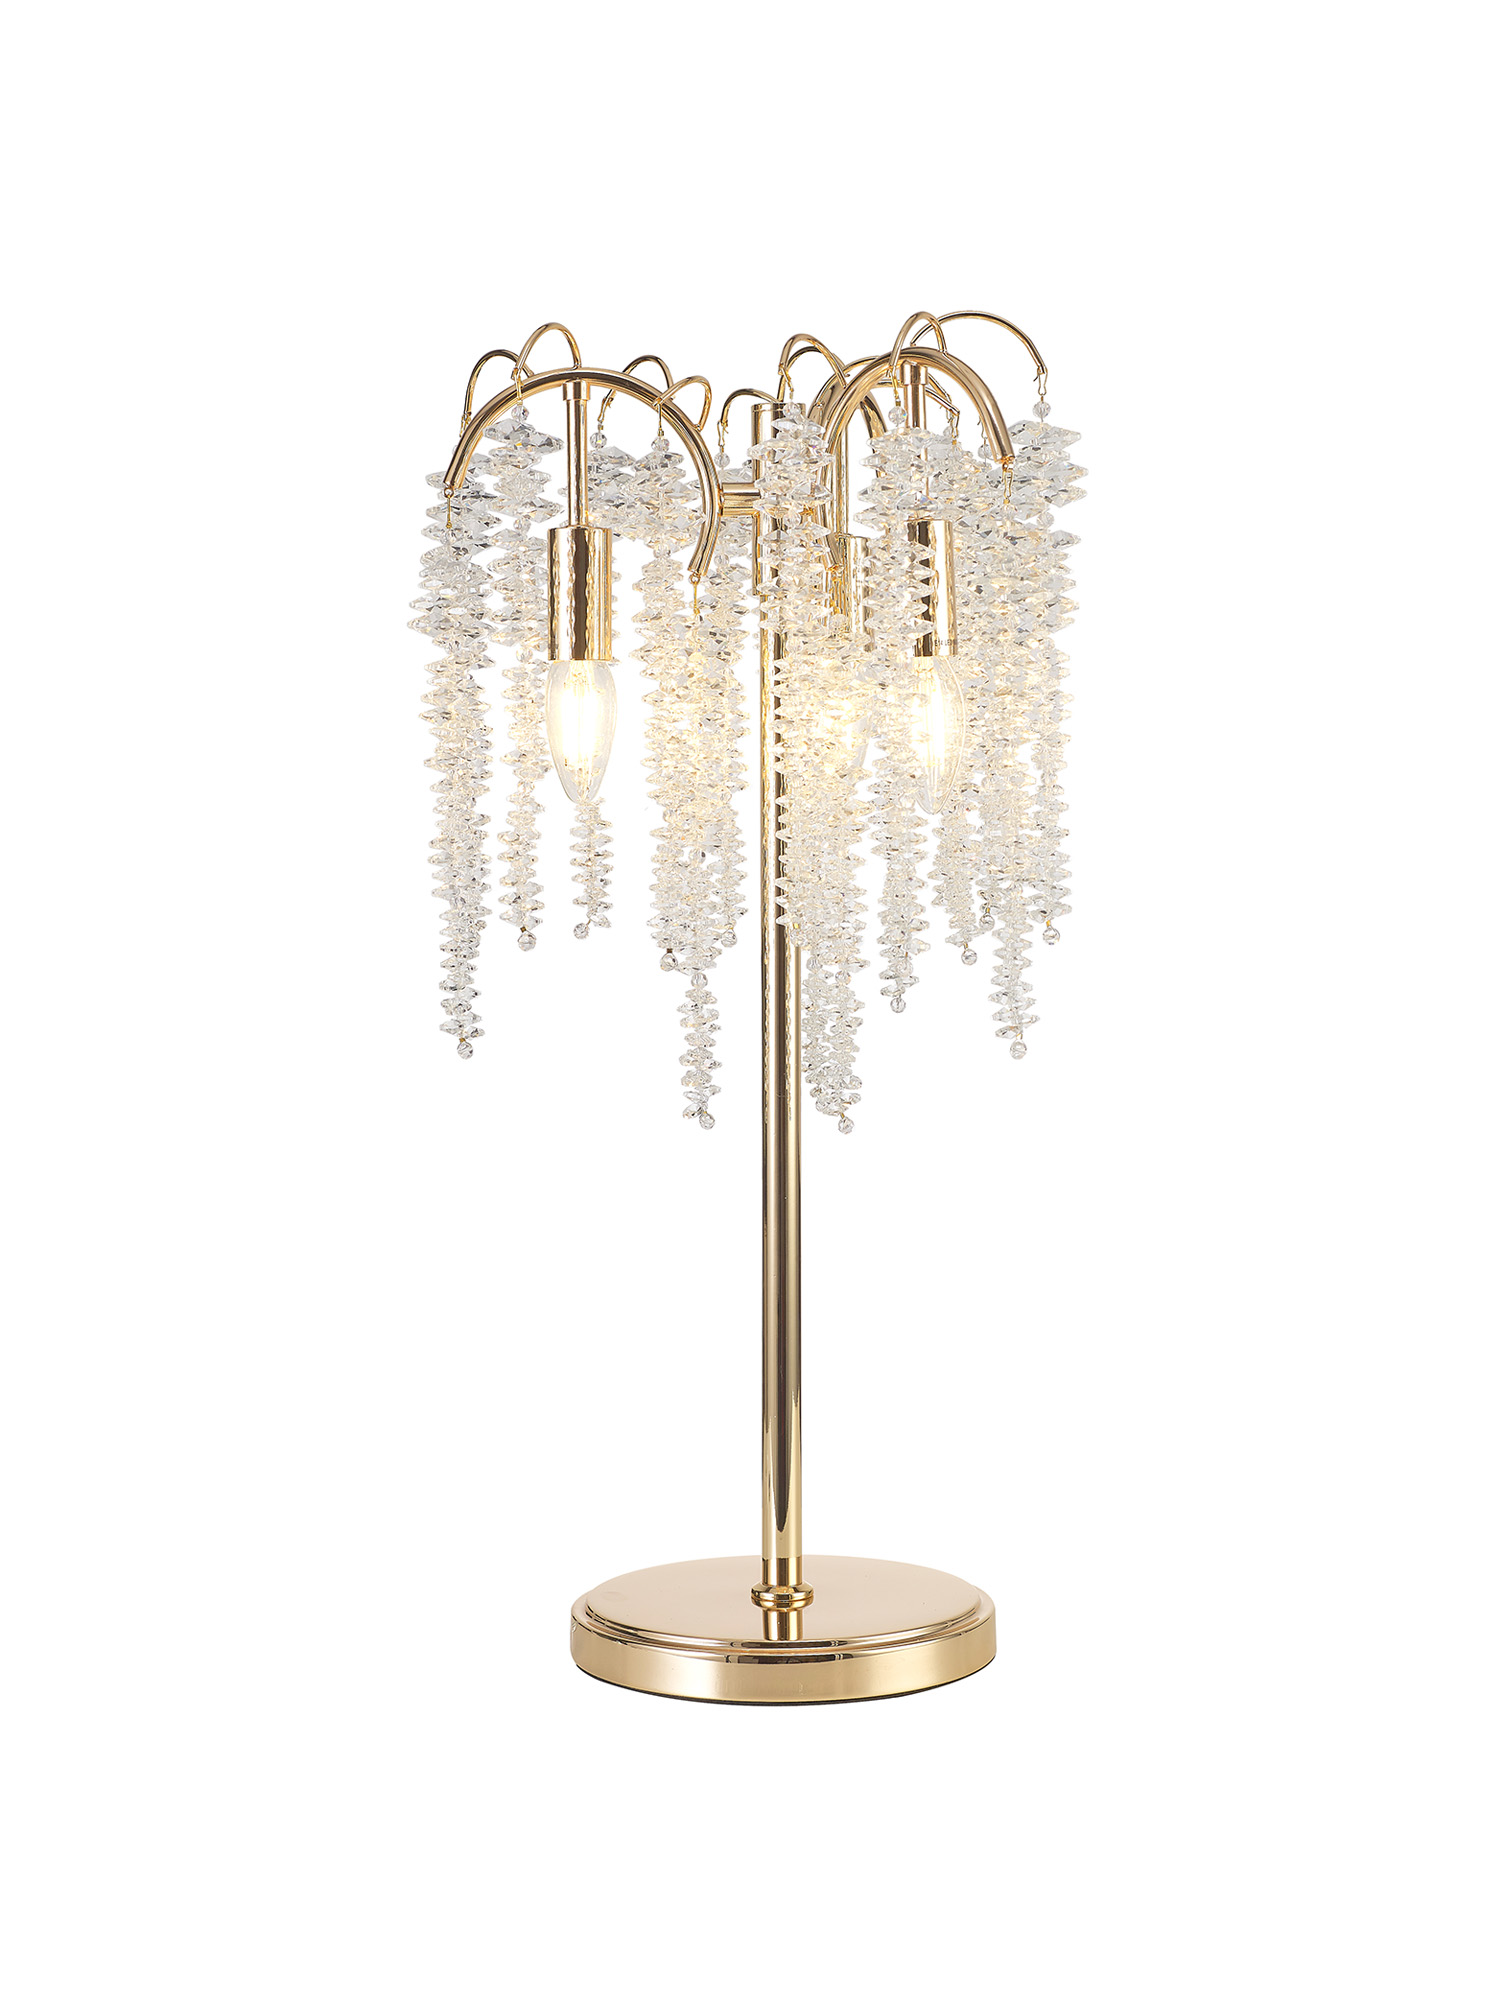 IL32900  Wisteria 62cm Table Lamp 3 Light French Gold